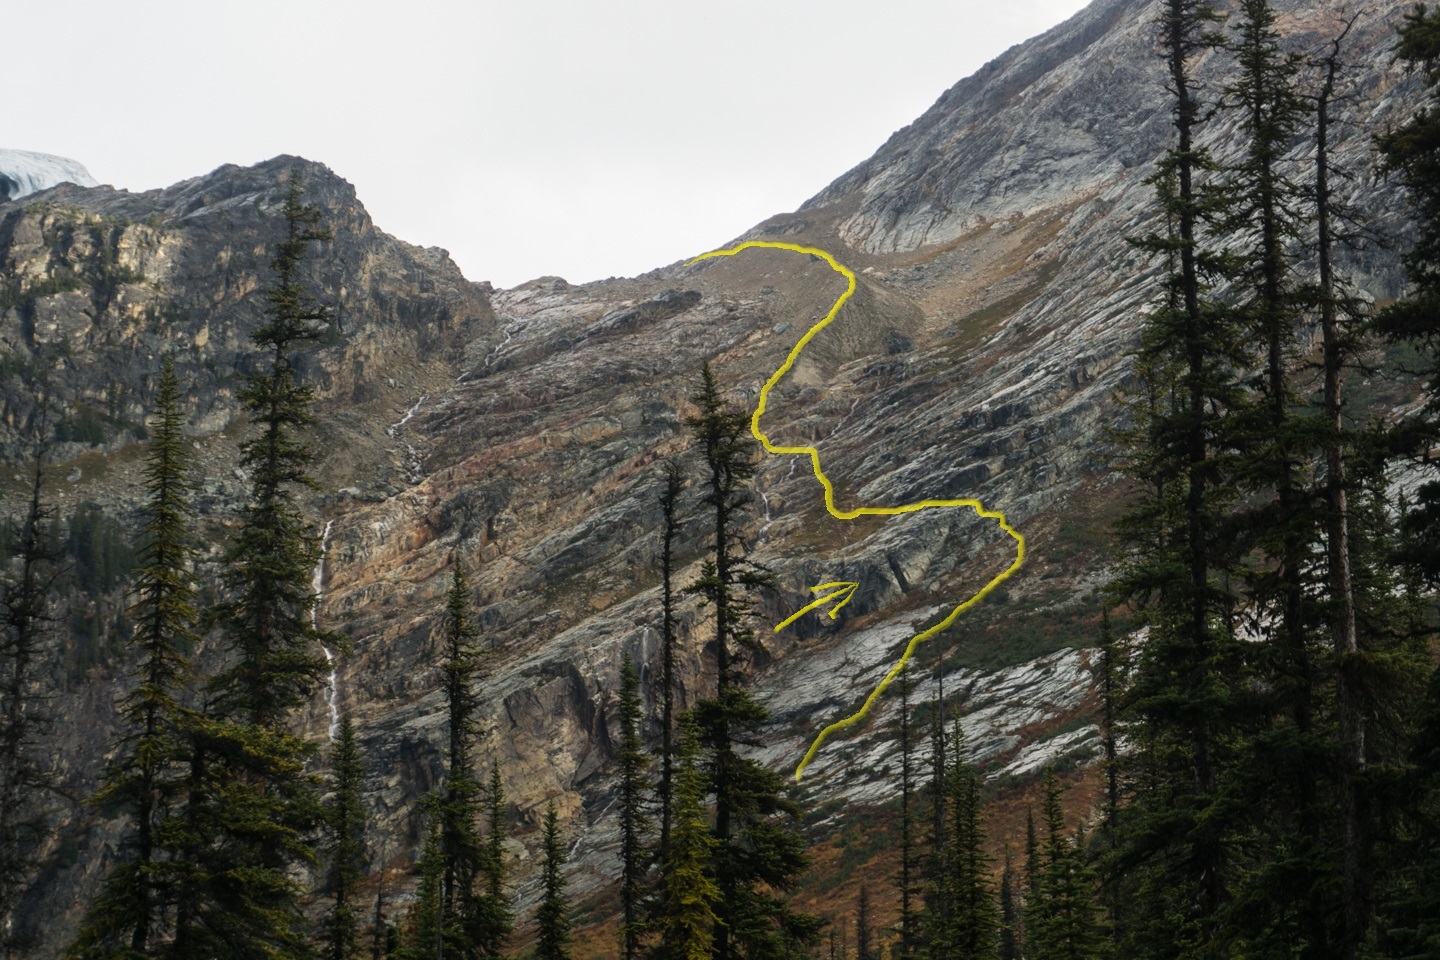 Yellow: Route up the rock ledge and moraine. Arrow points to triangular landmark